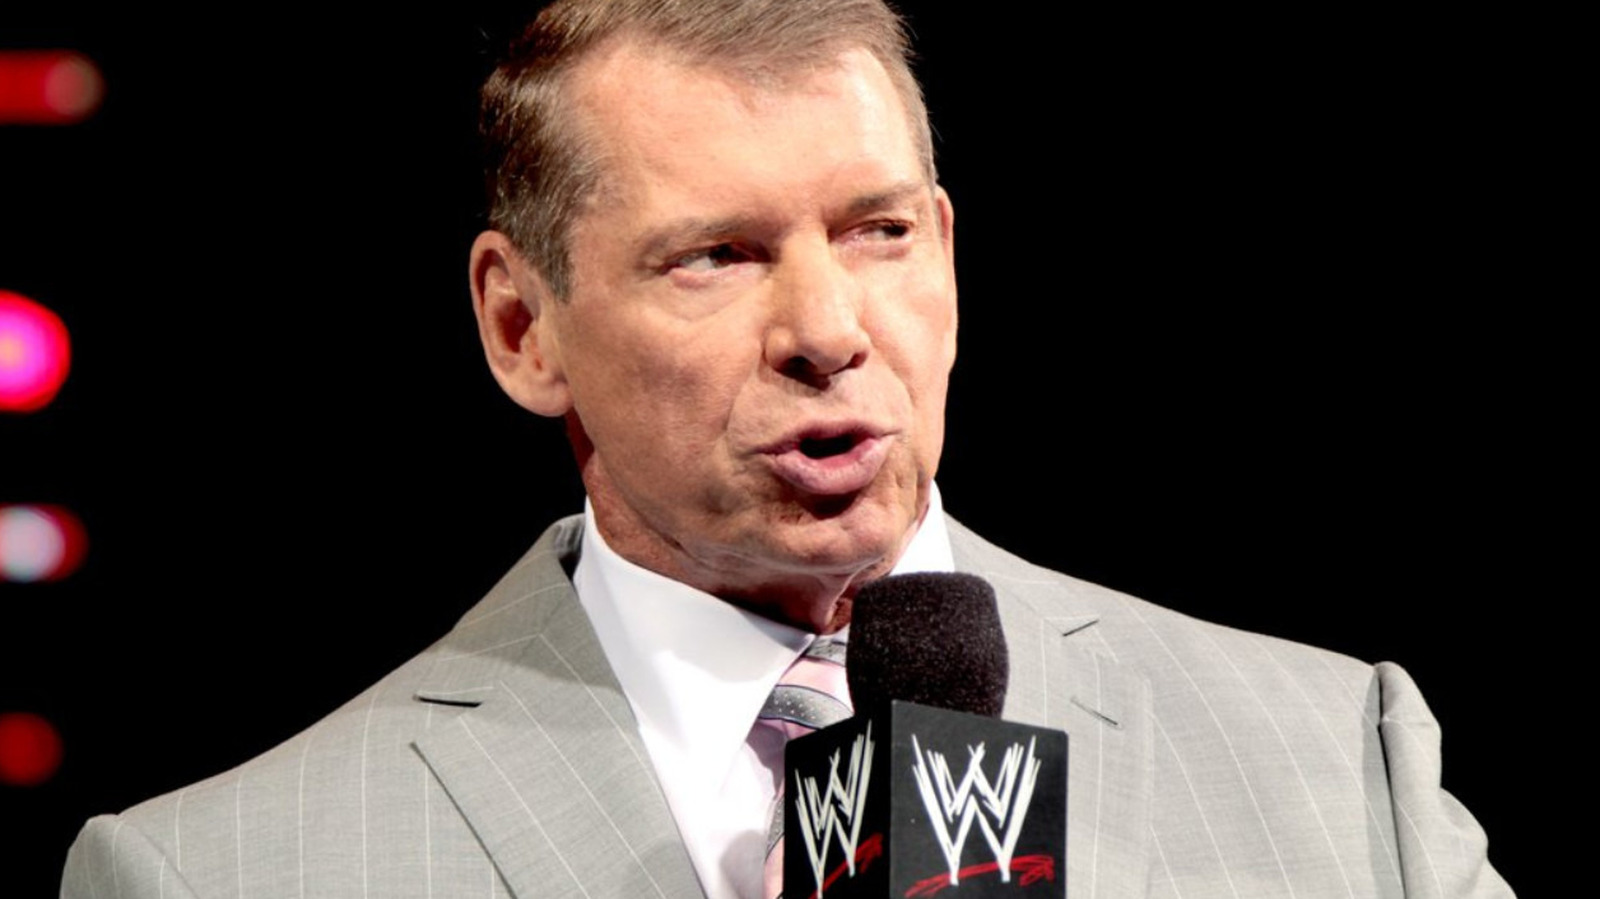 Vince McMahon's New WWE Contract Contains Code Of Conduct Clause